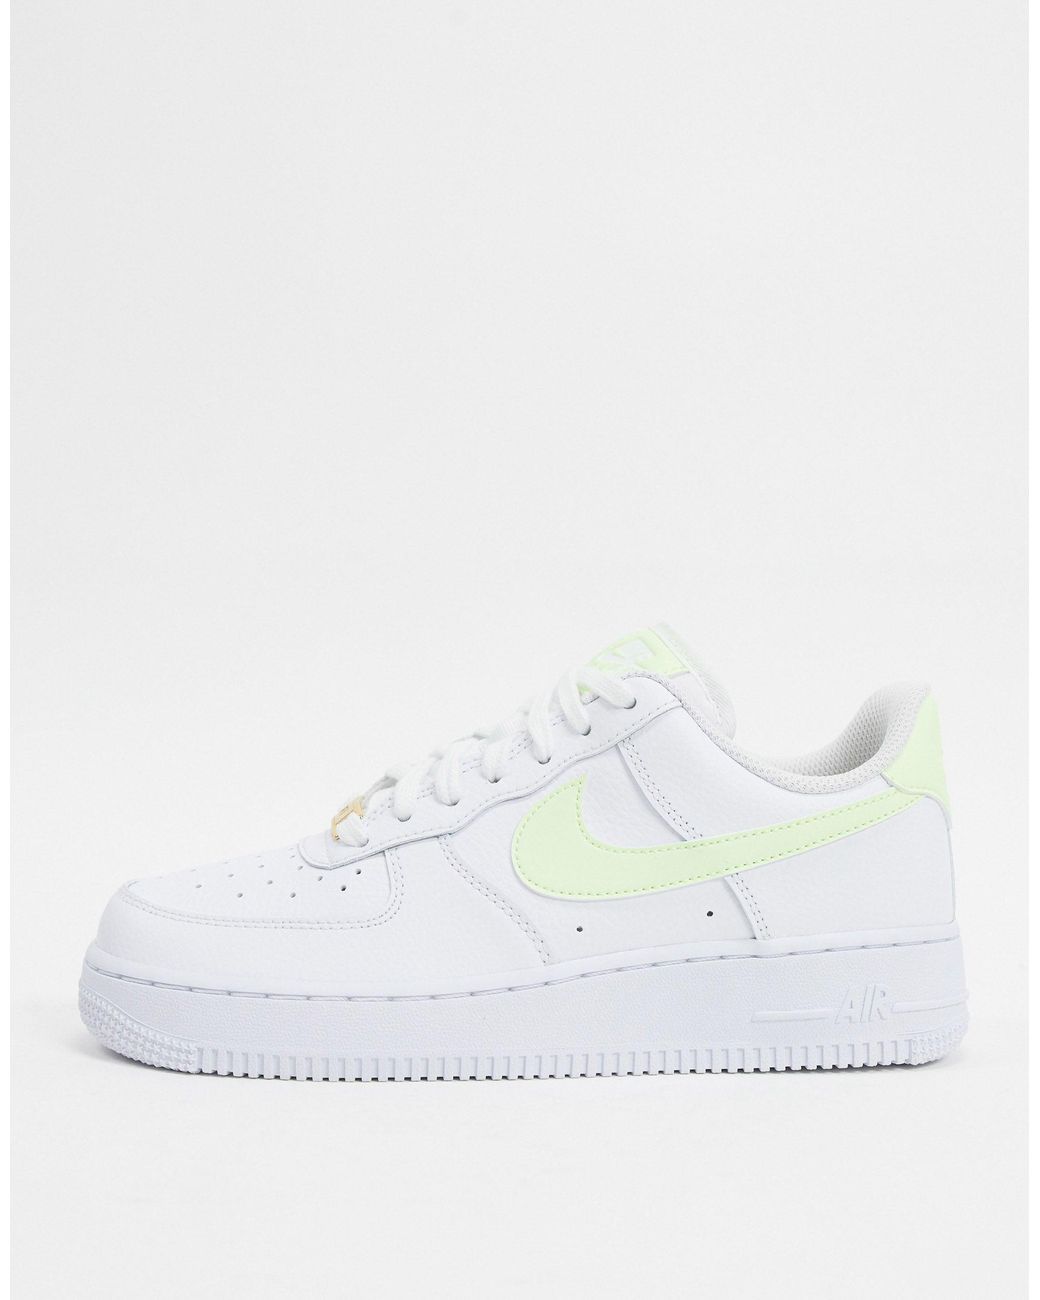 Nike Rubber Air Force 1 '07 White And Fluro Green Sneakers | Lyst UK